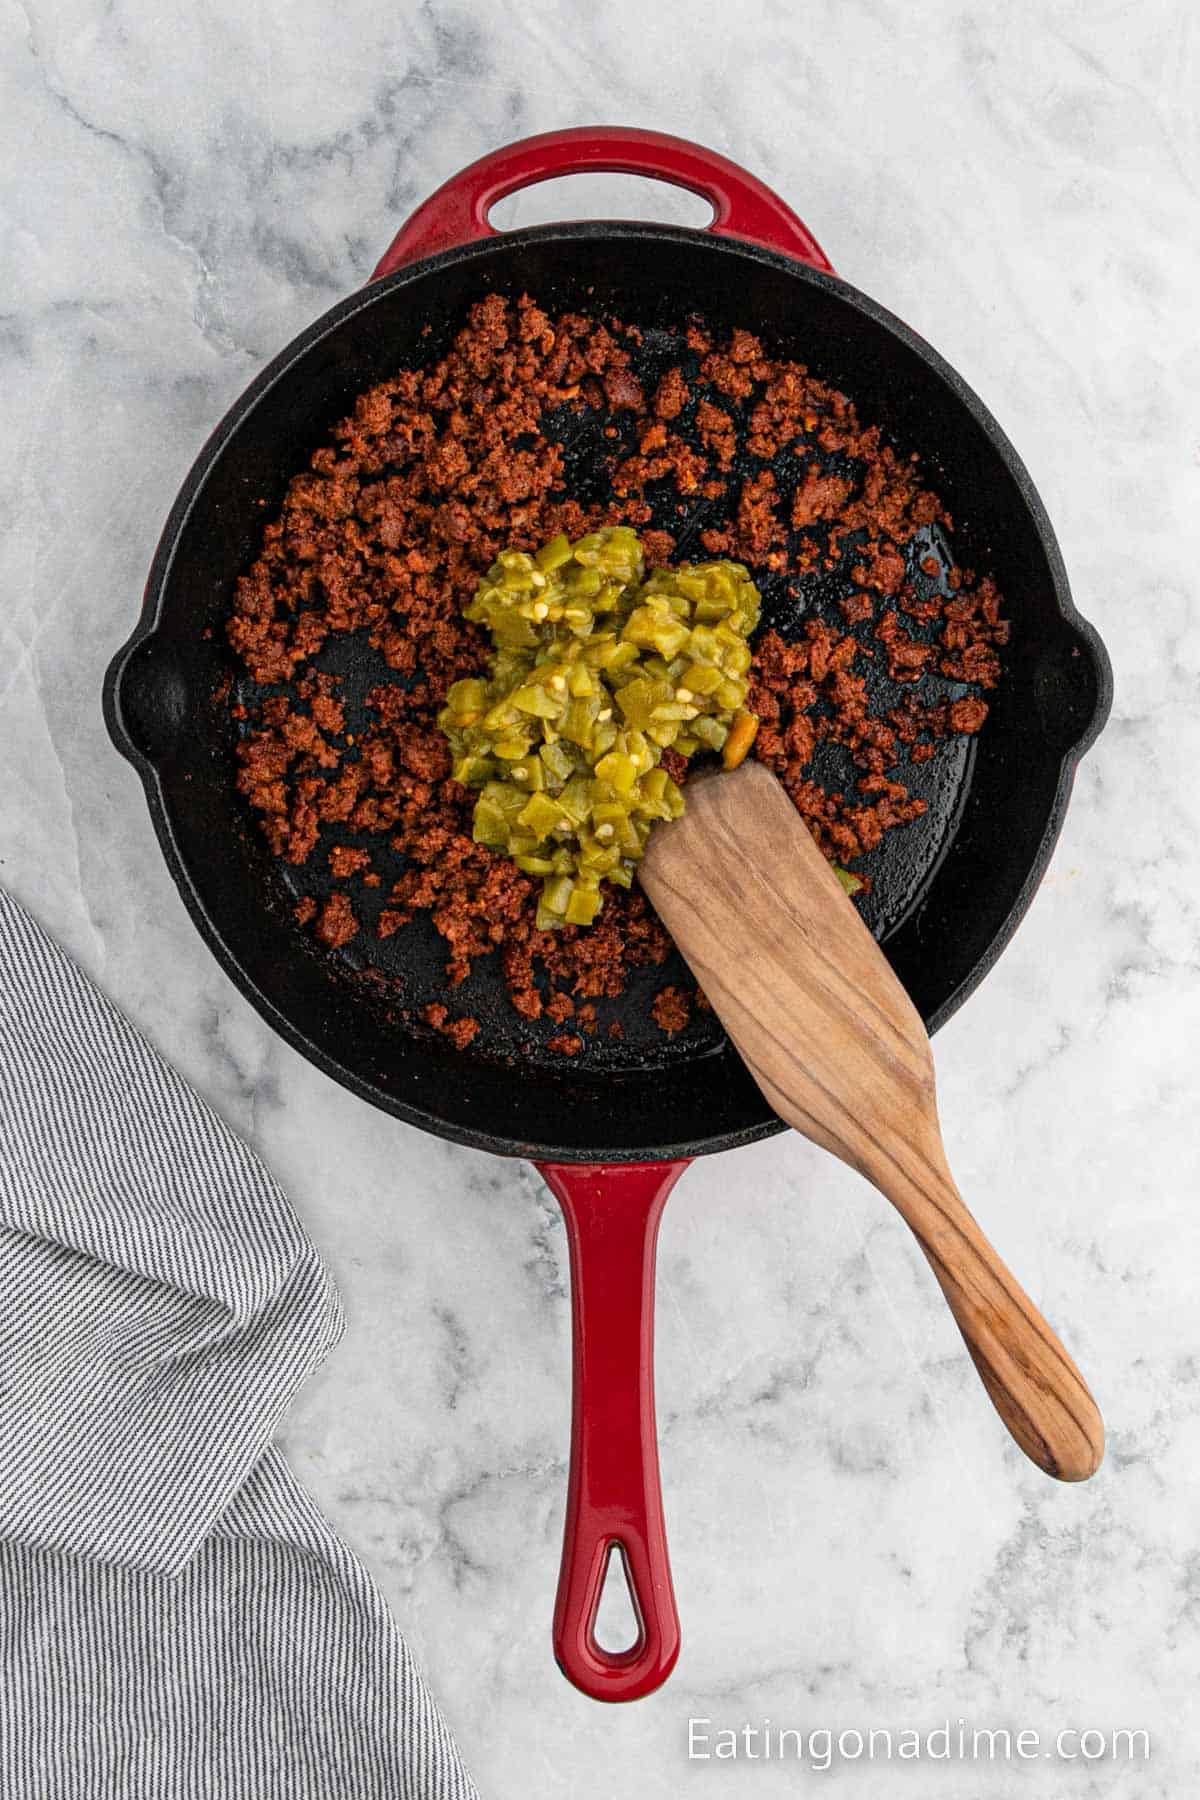 Stirring in green chiles into the ground chorizo in a cast iron skillet with a wooden spoon